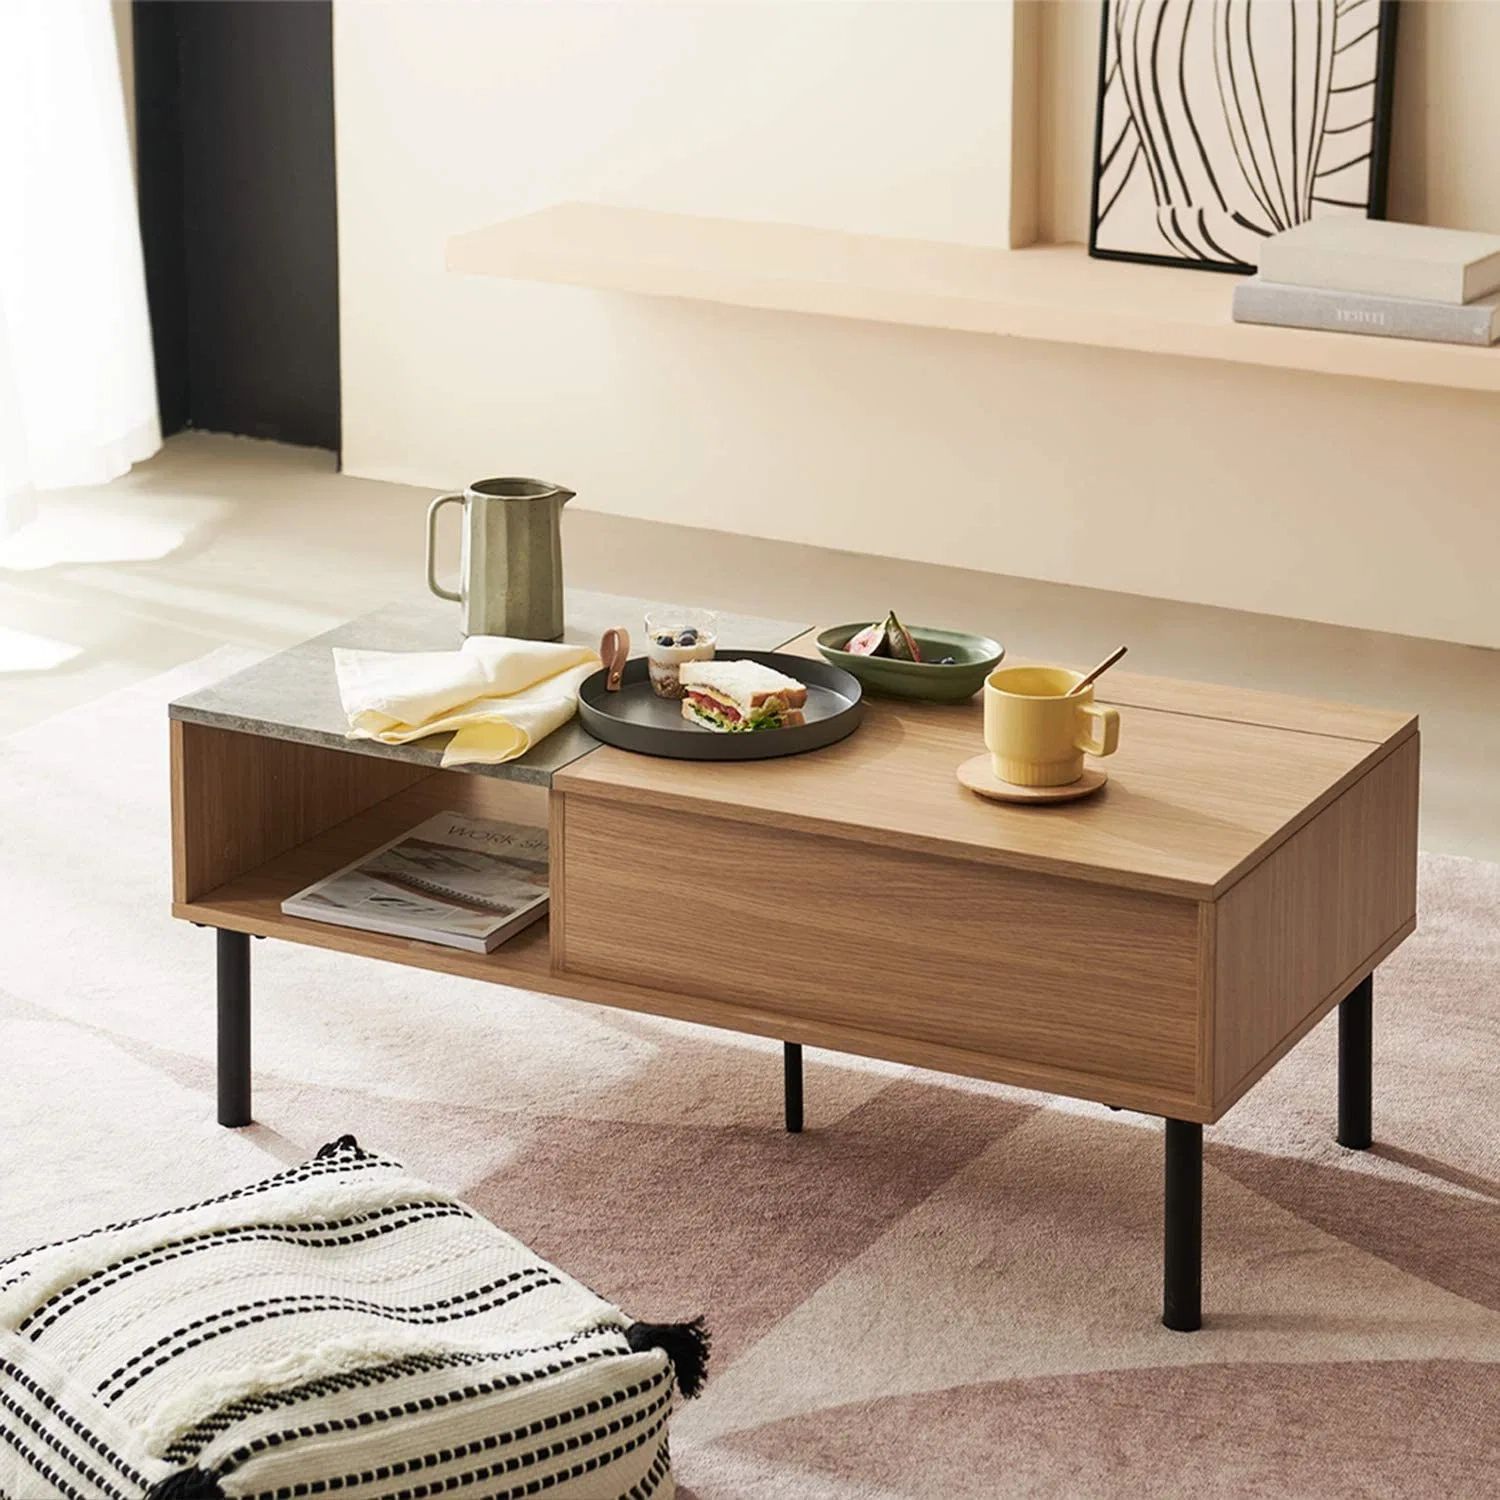 Lift Top Coffee Table With Drawers And Hidden Compartment – China Tea Table  With Chairs, Low Tea Table | Made In China With Regard To Lift Top Coffee Tables With Storage Drawers (View 15 of 15)